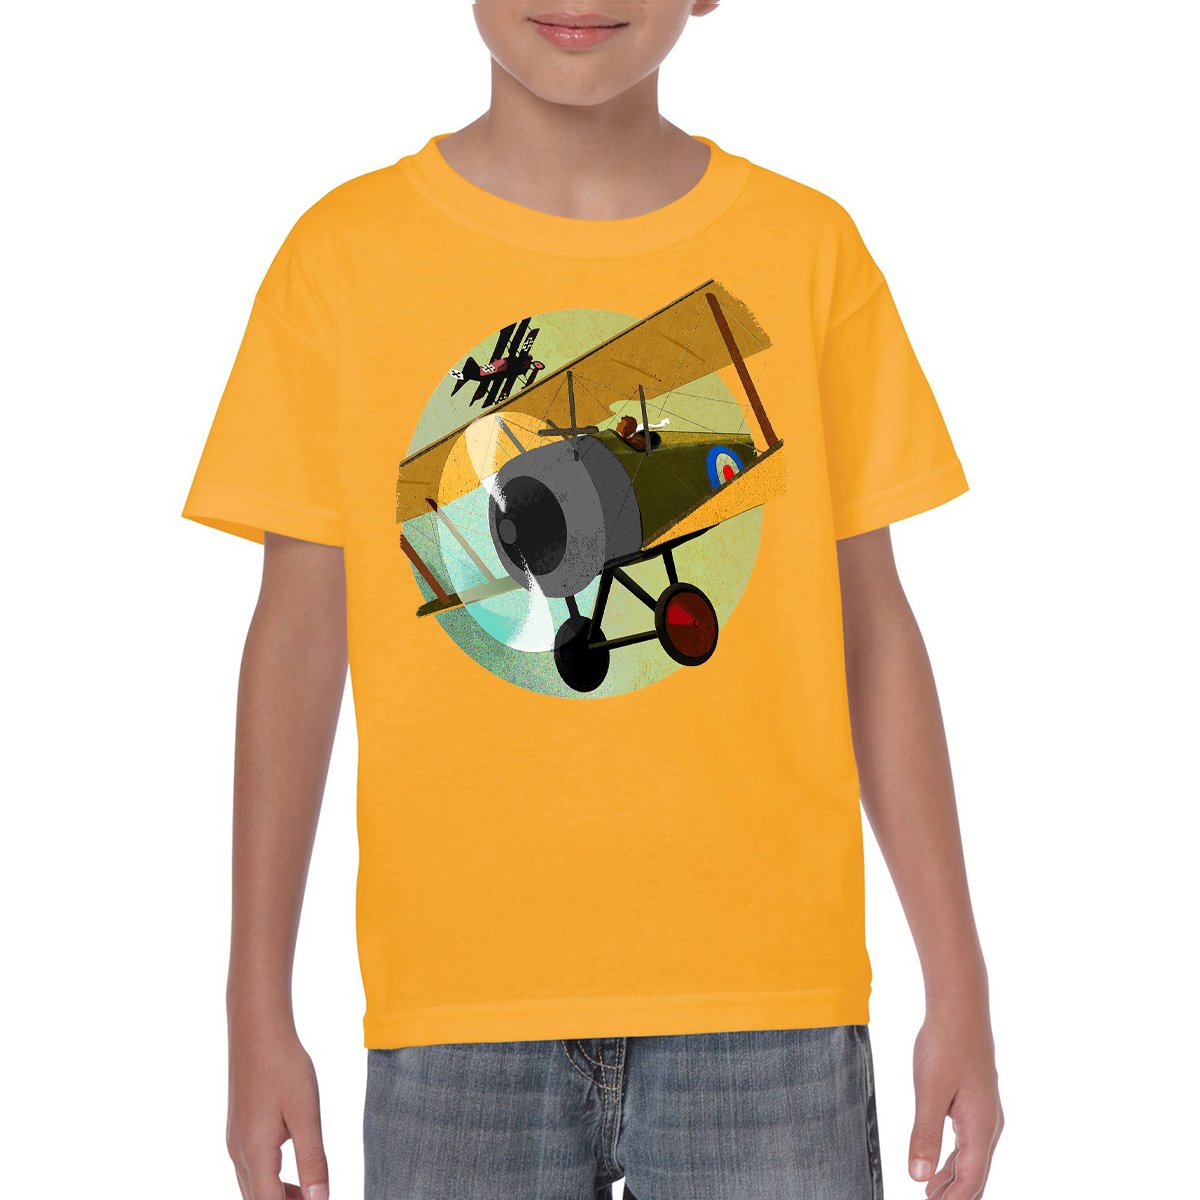 TALLY-HO Youth Semi-Fitted T-Shirt